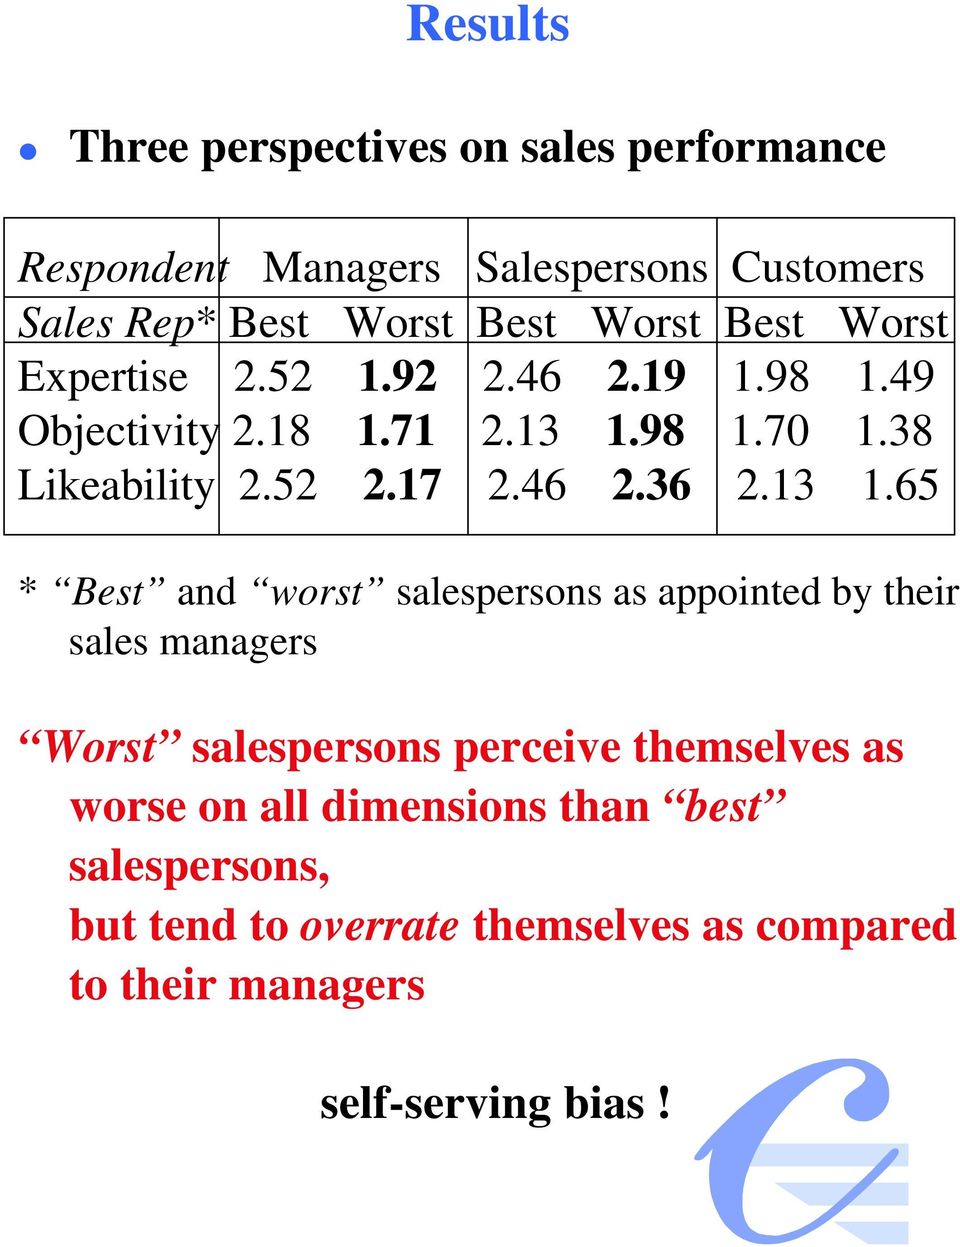 13 1.65 * Best and worst salespersons as appointed by their sales managers Worst salespersons perceive themselves as worse